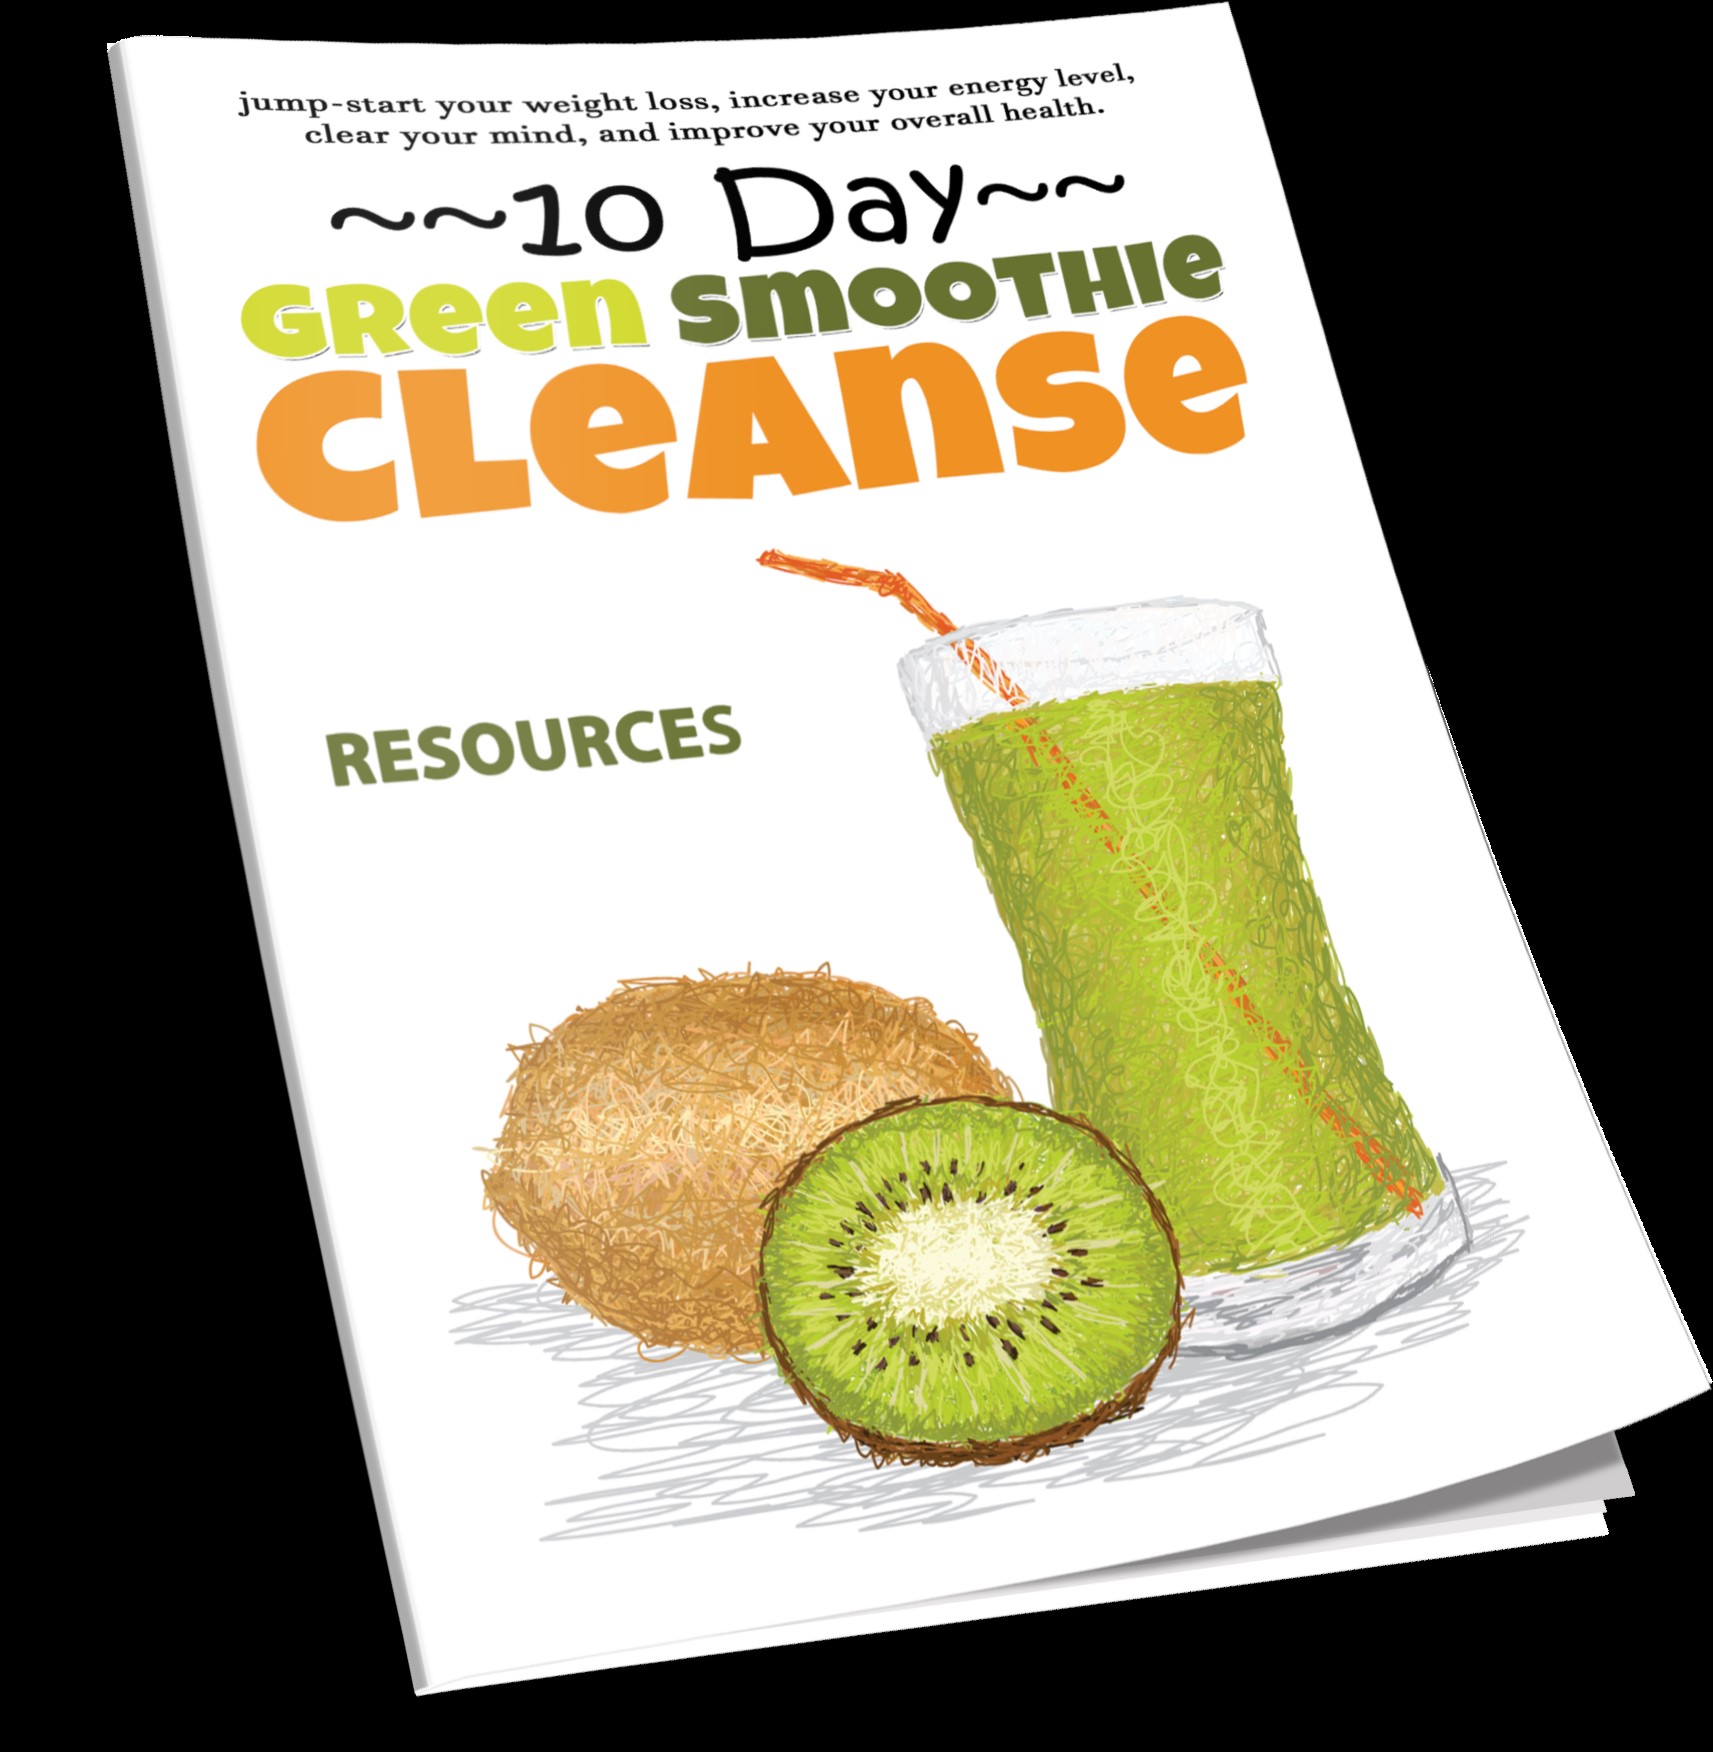 Green Smoothie Cleanse resources